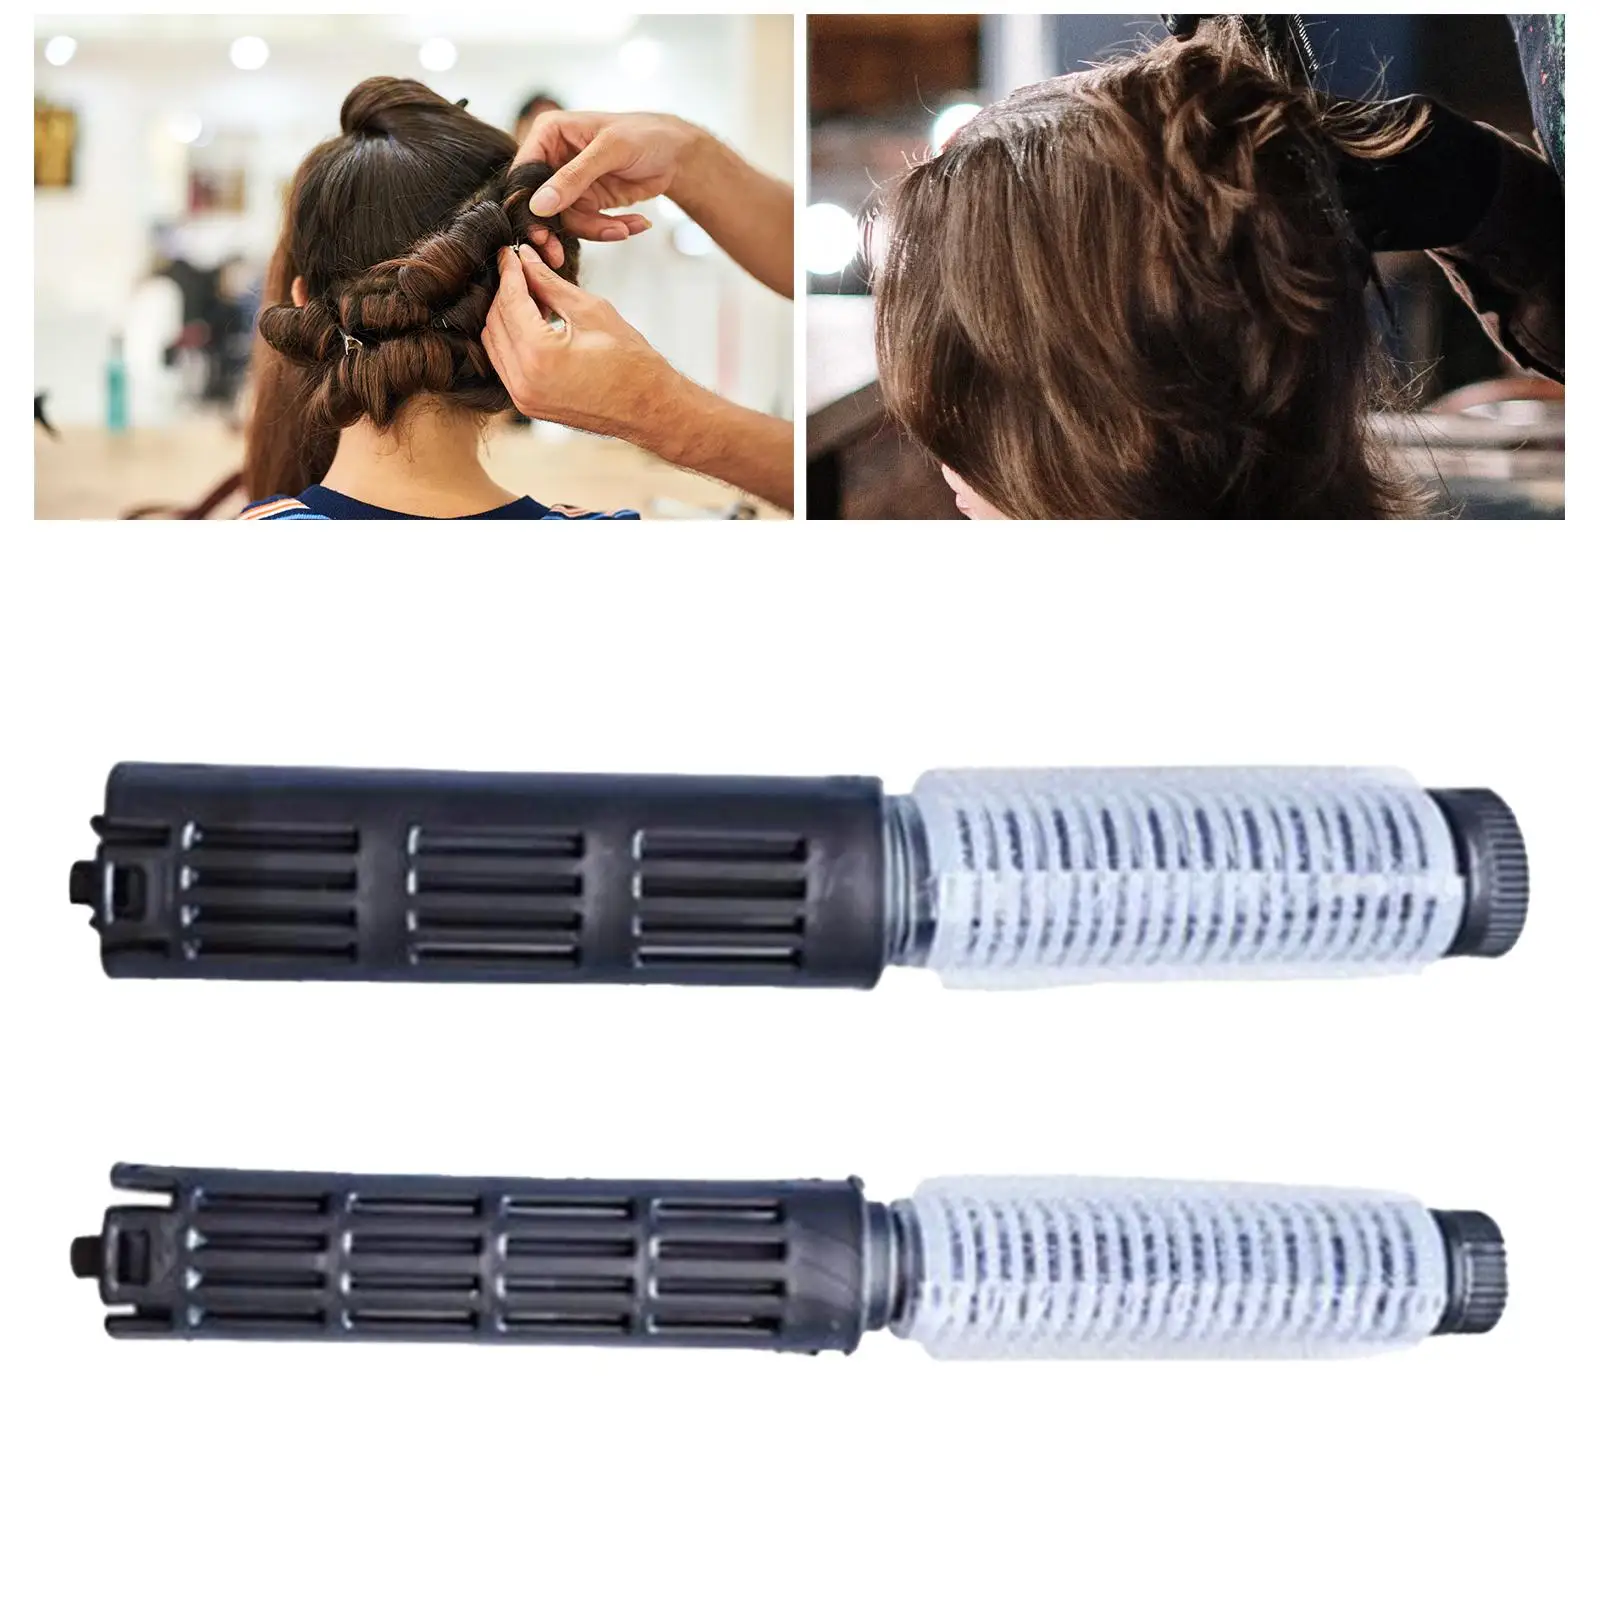 Perm Rods No Heat Durable Hairdressing Styling Tool Non Slip Morgan Perm Curler Clips for Long Short Hair Salon Home Barber